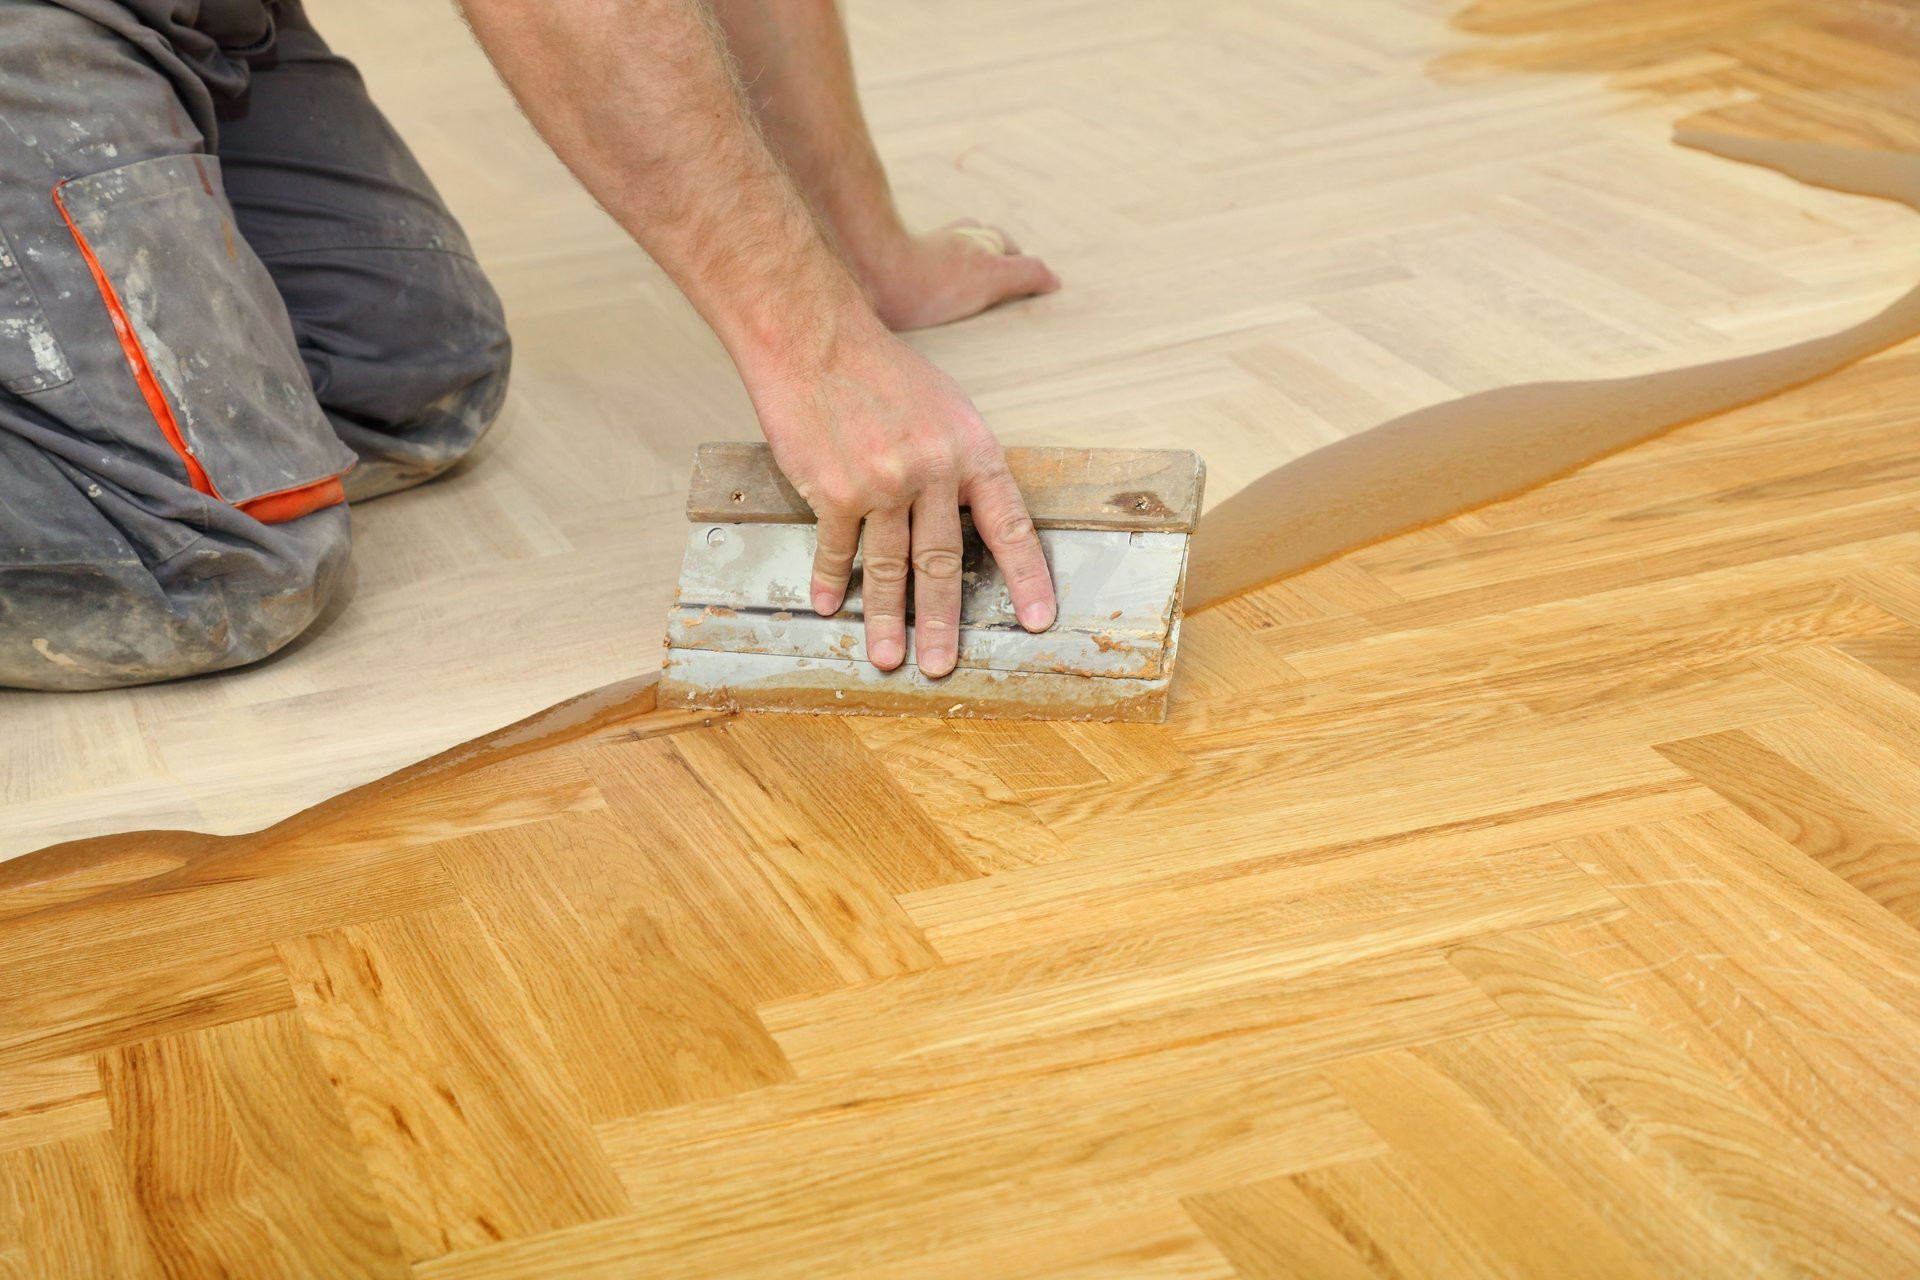 hardwood flooring jobs near me of american floor service hardwood flooring fairfield ct inside jeff and his team did a fantastic job dealing with jeff was a pleasure he is a true professional that cares about the work he is doing